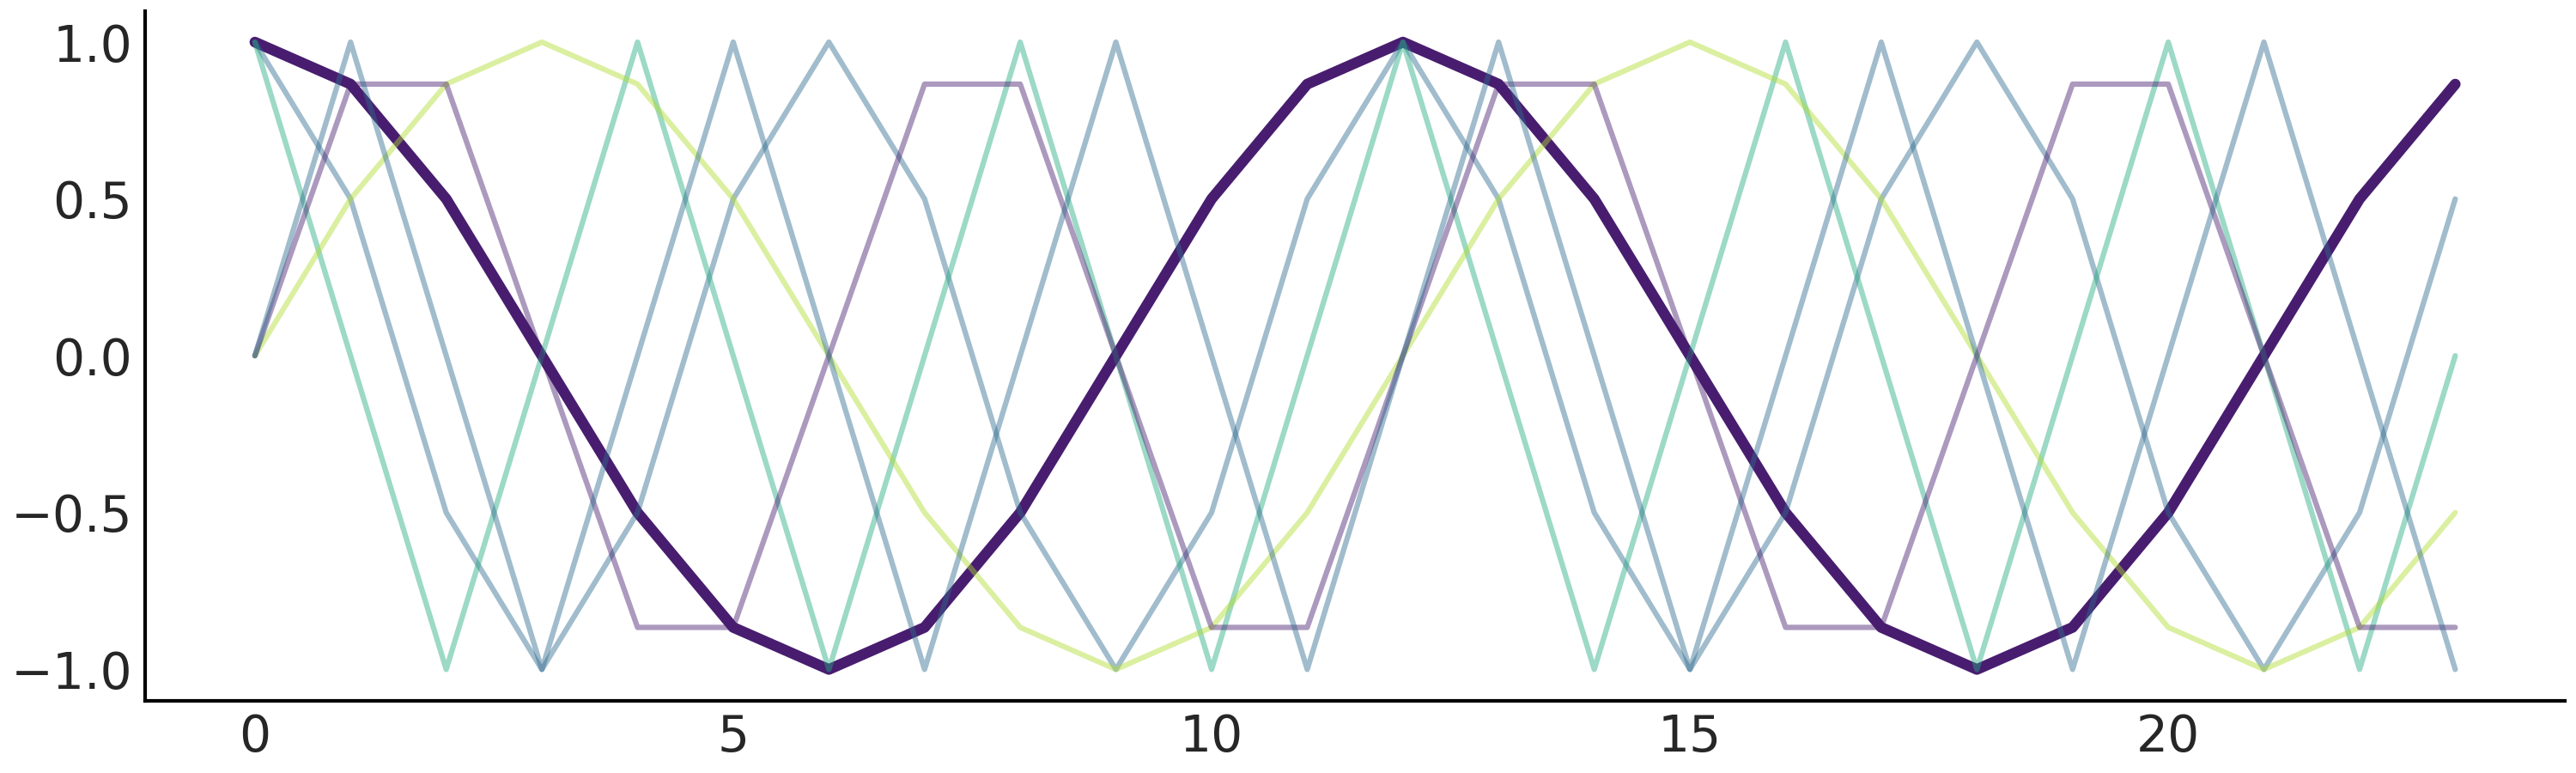 ../_images/fig7_fourier_basis.png